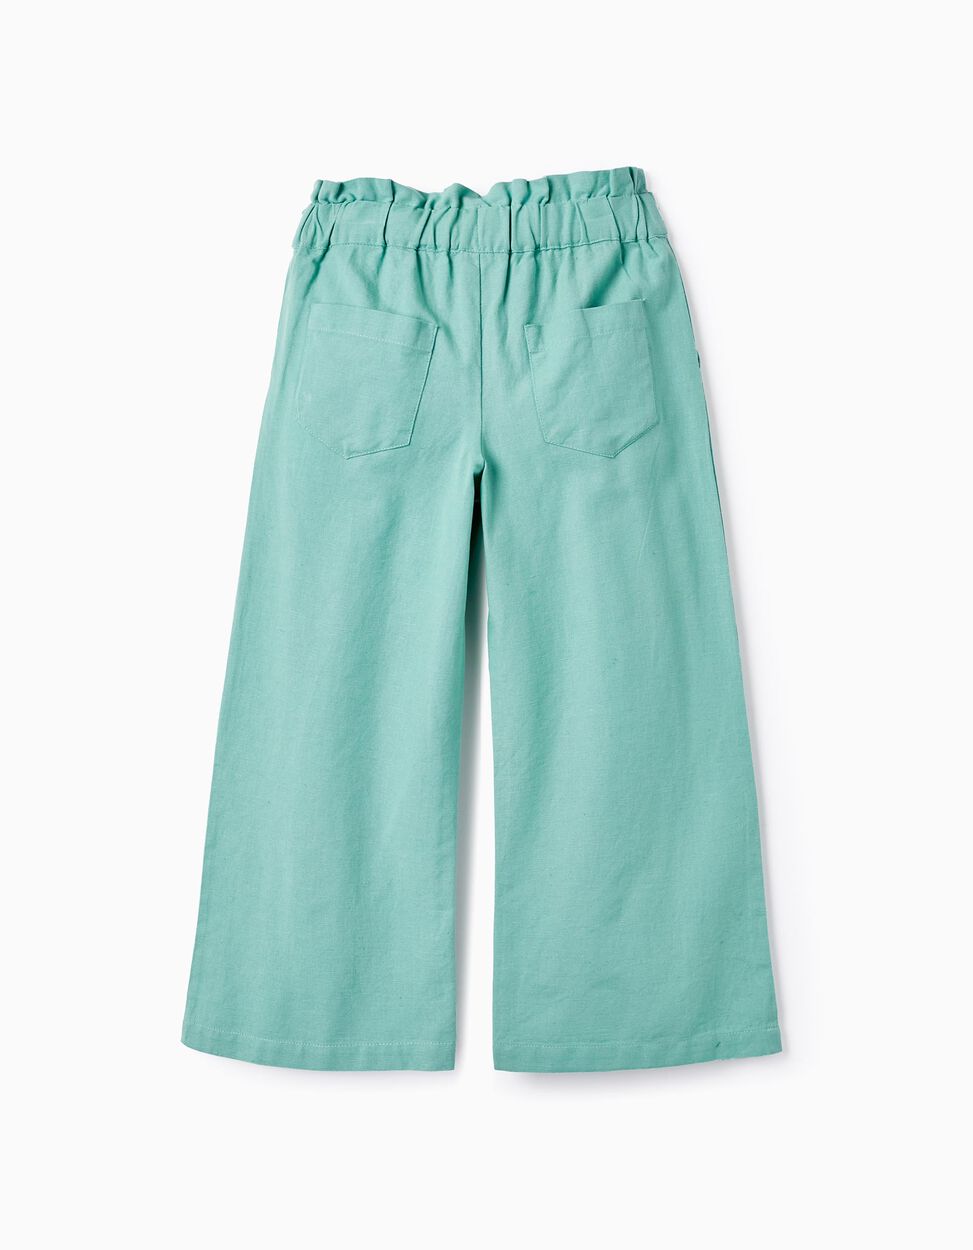 Buy Online Cotton and Linen Trousers for Girls 'B&S', Green